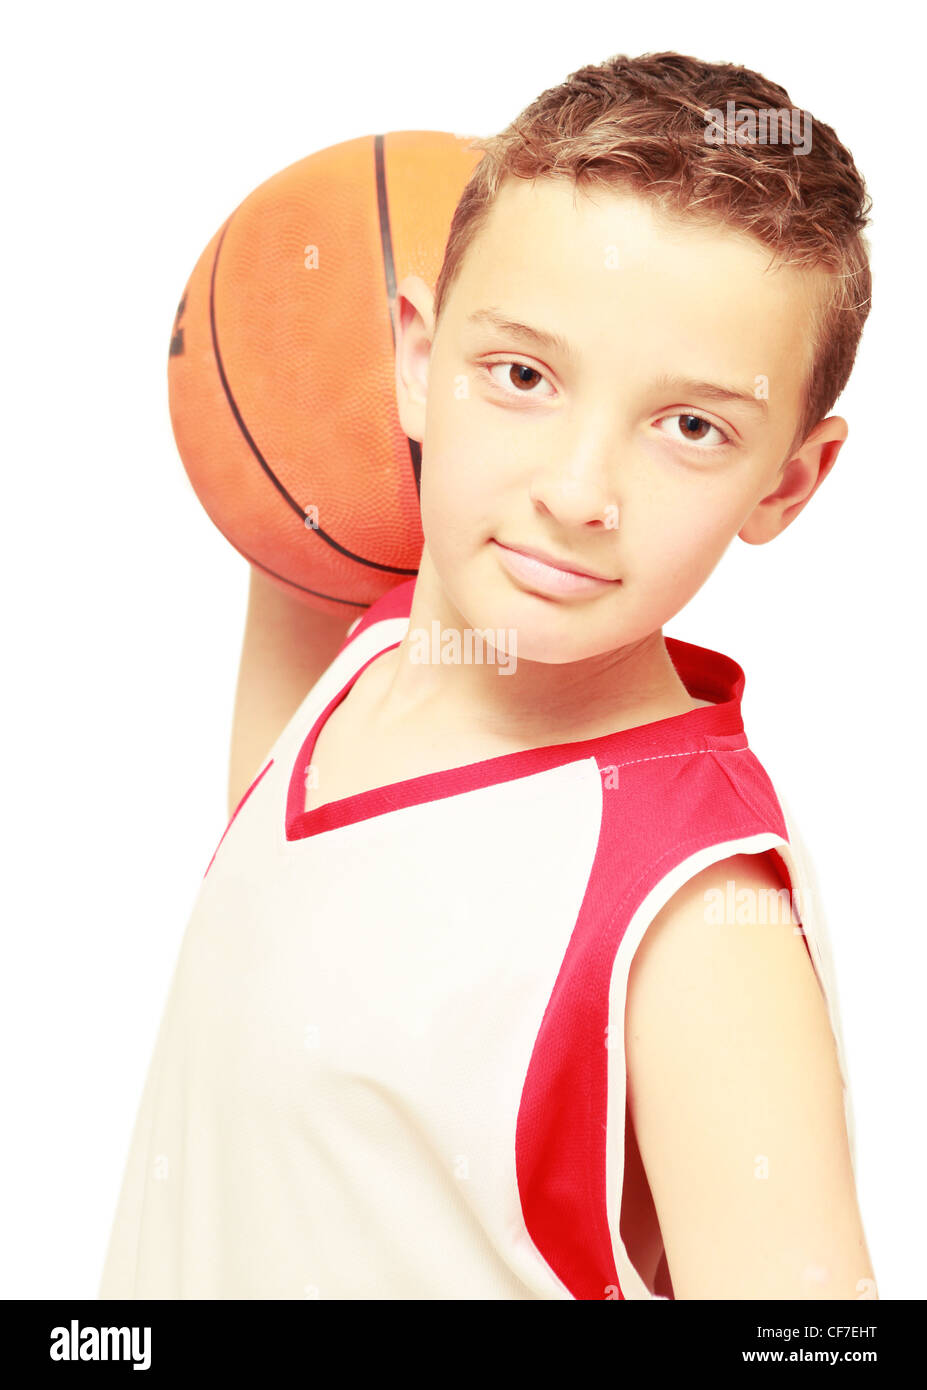 people game play basketball sport Stock Photo